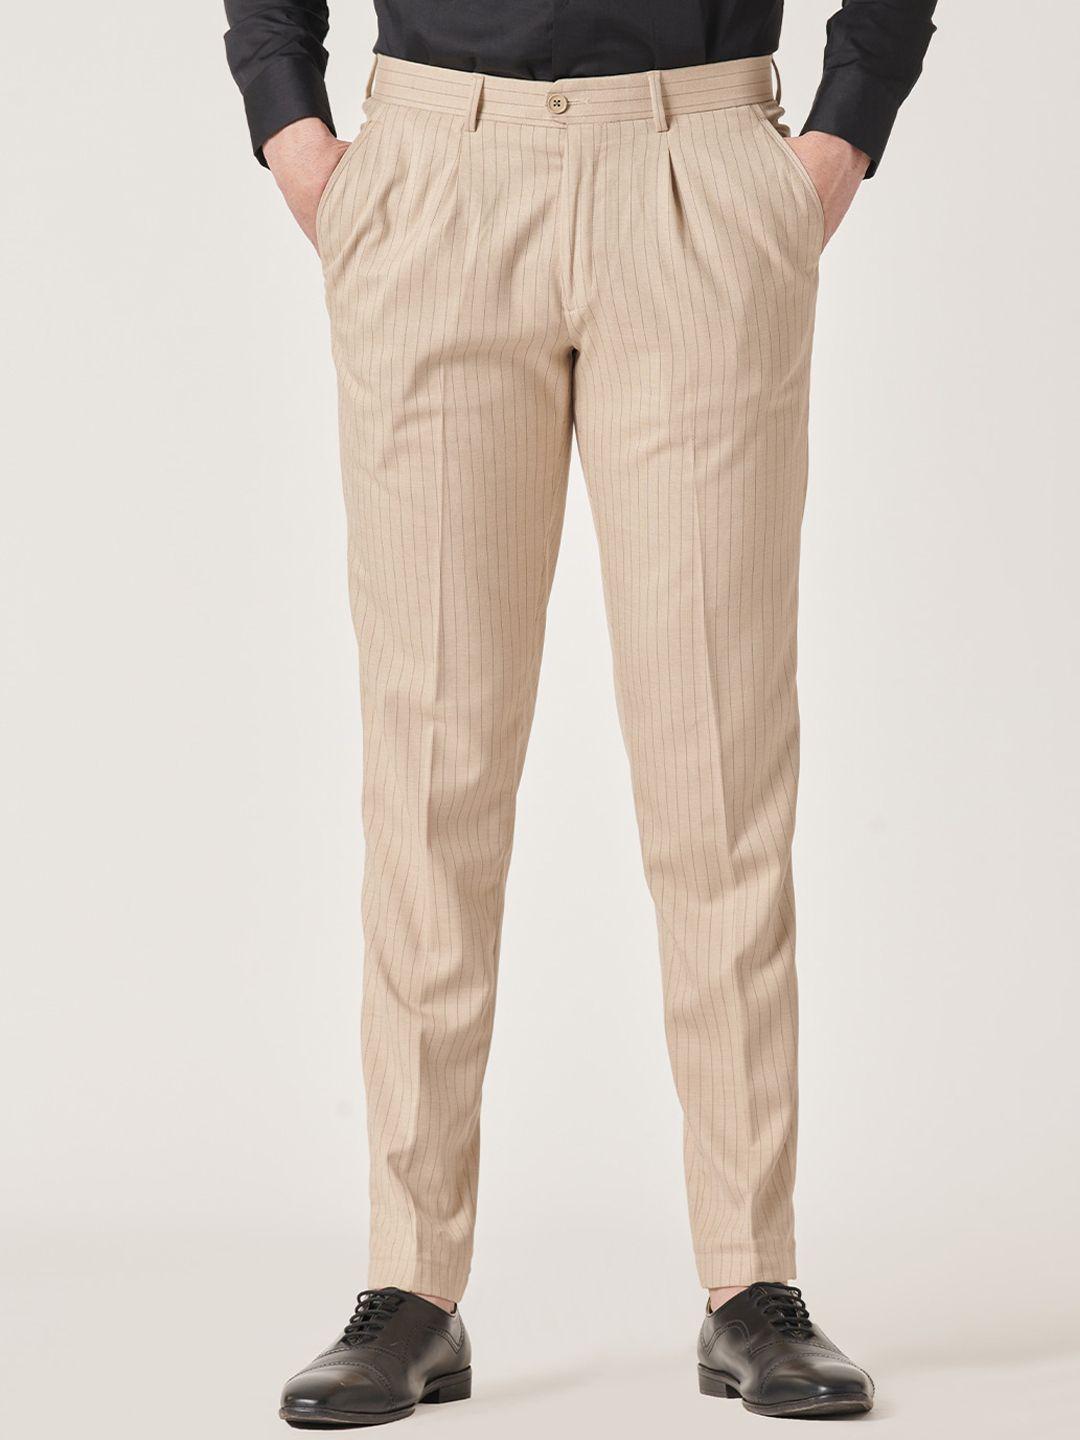 mr-button-men-slim-fit-pleated-formal-trousers